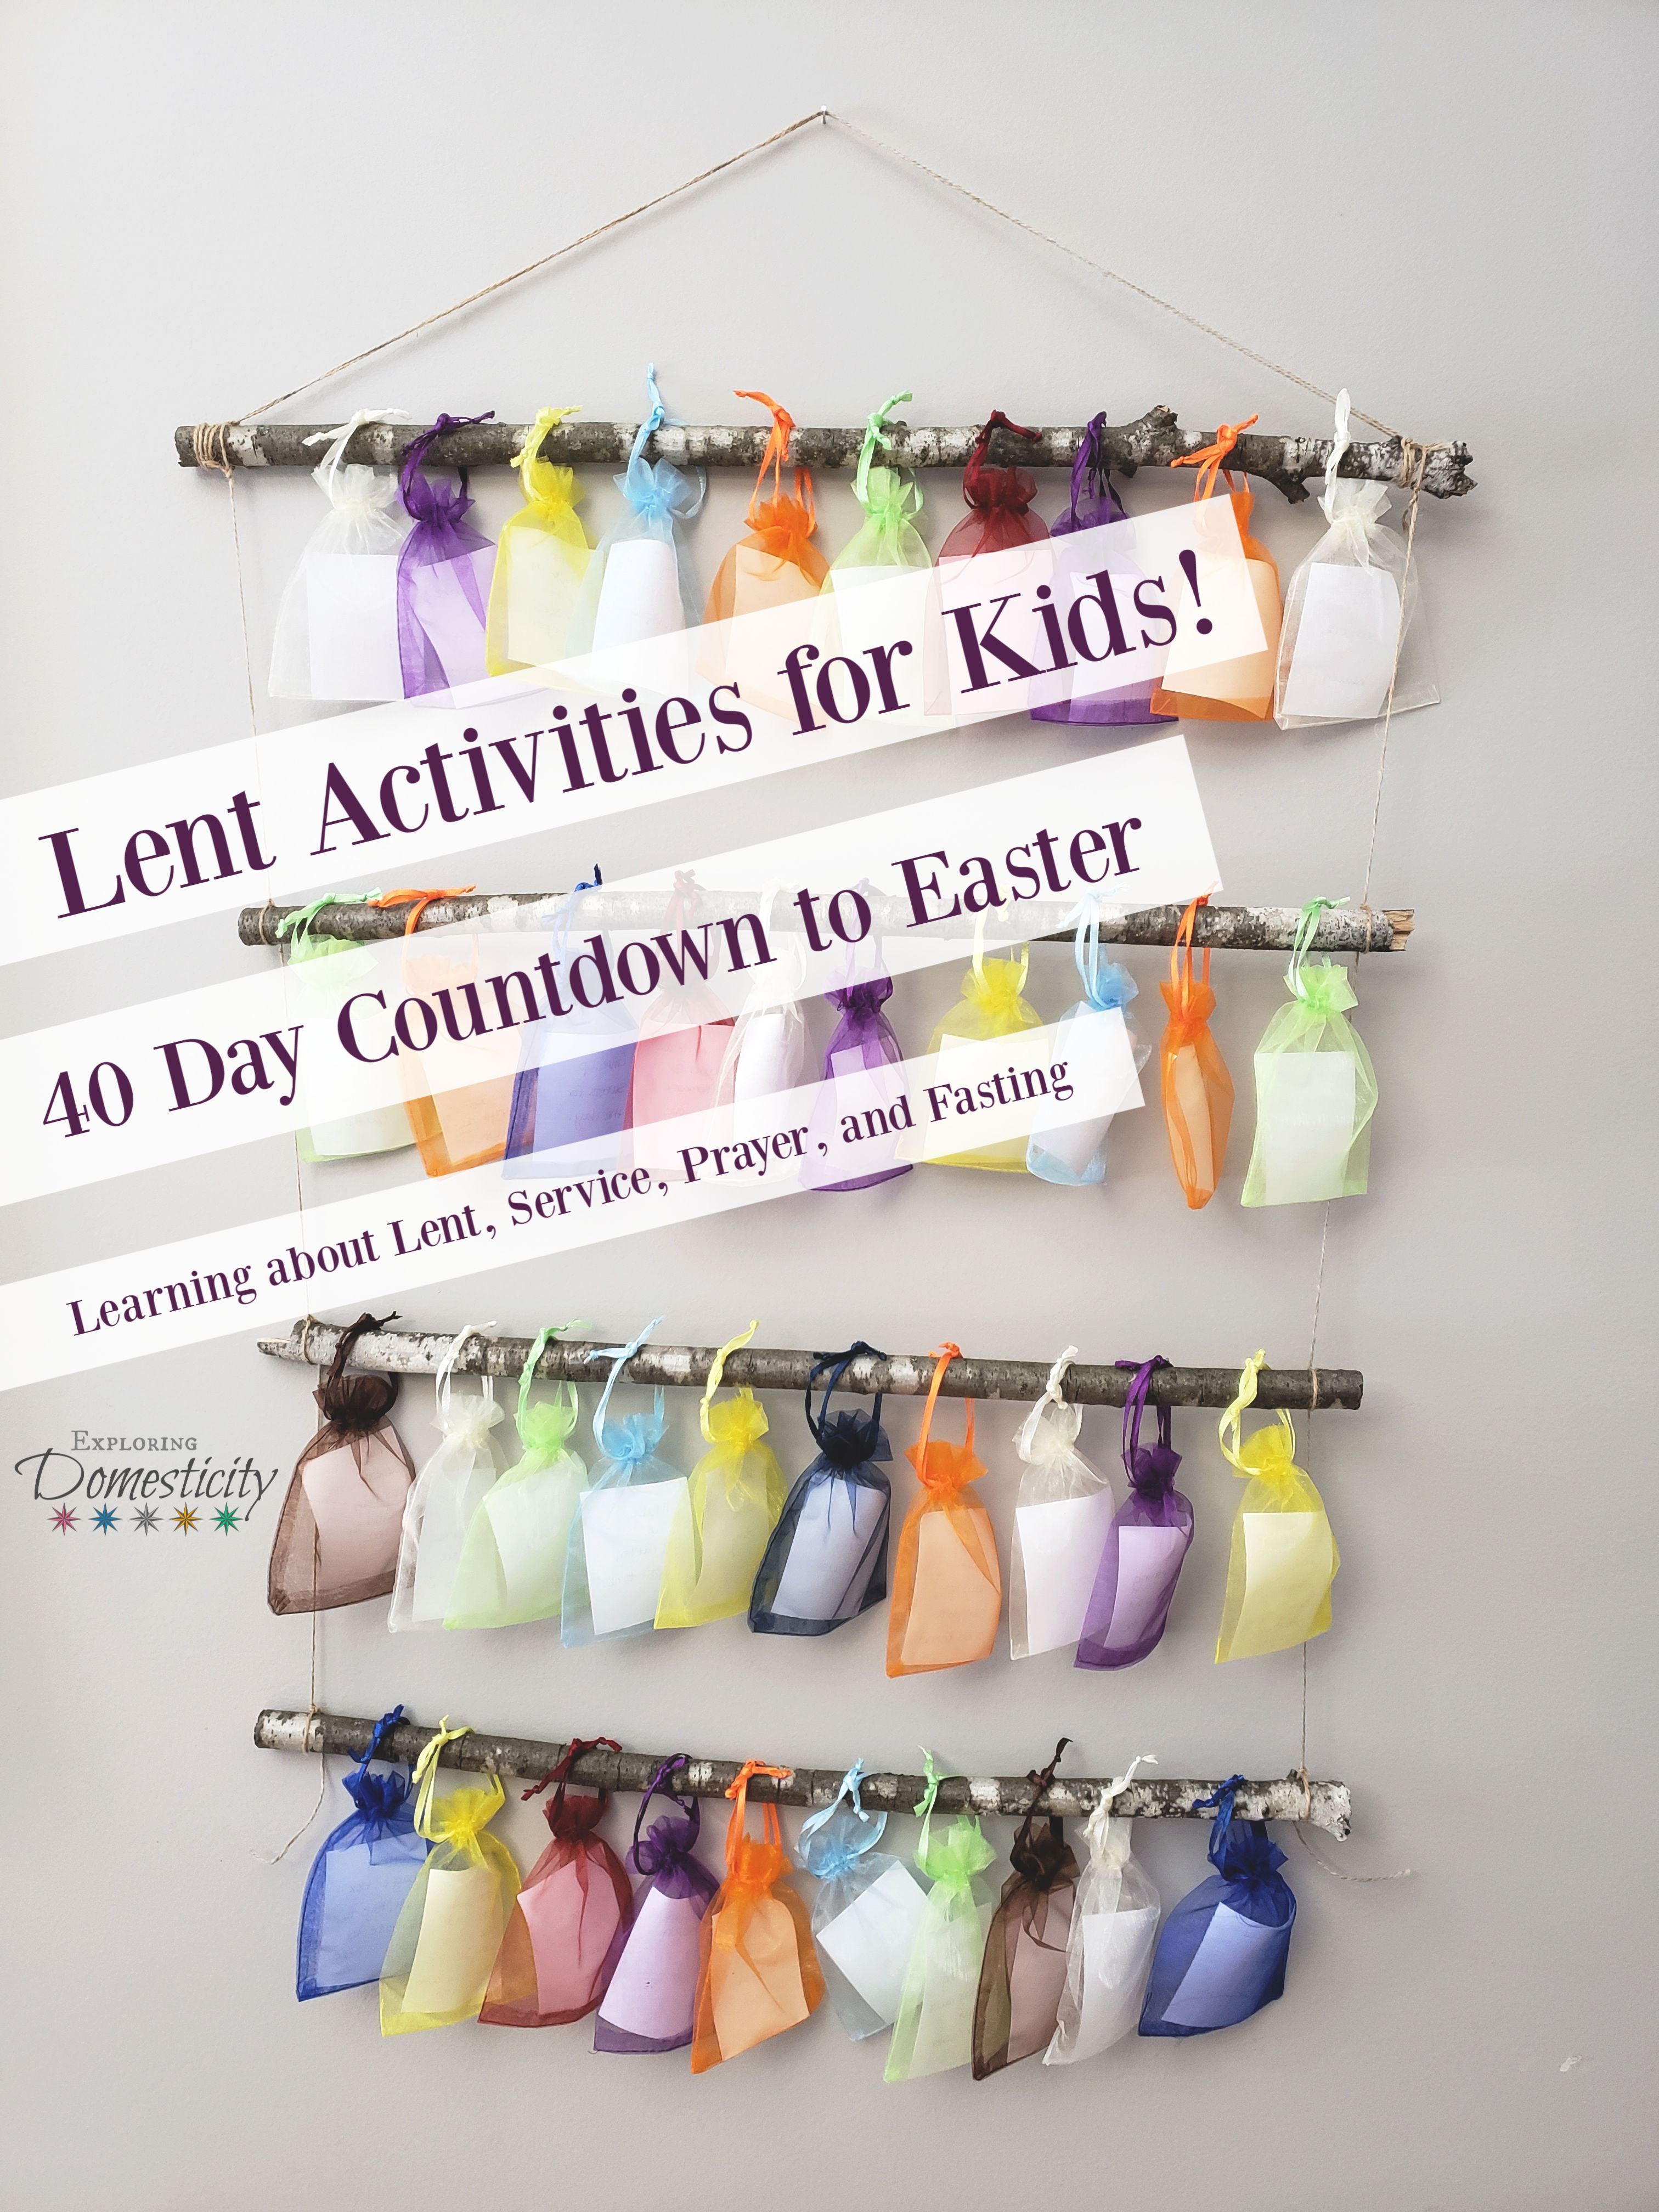 Lent Activities for Kids 40 day countdown with activities for Lent